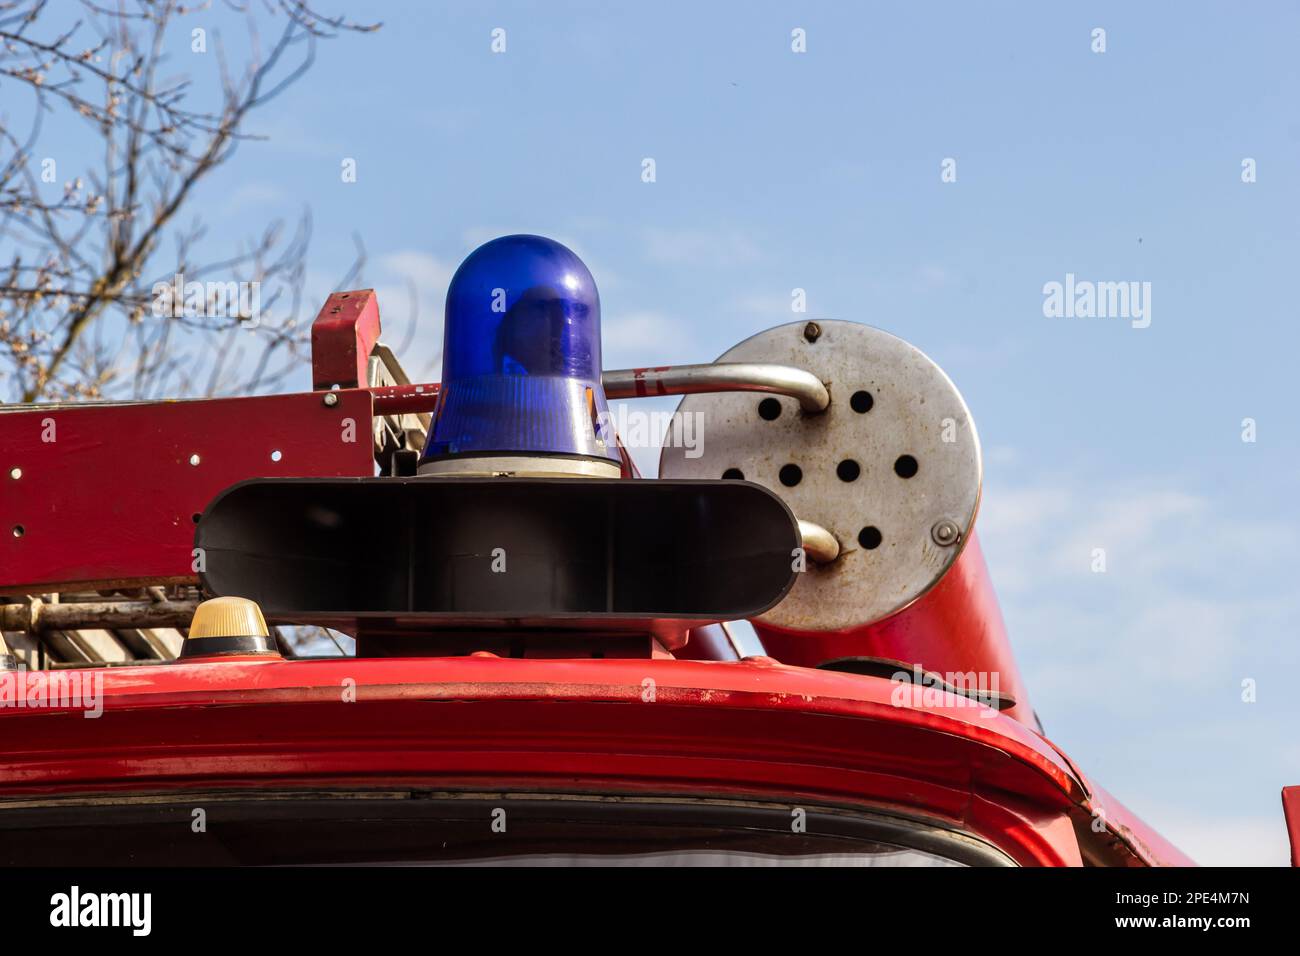 Close-up view of a blue light and fire hose on the roof of an antique fire engine. Stock Photo